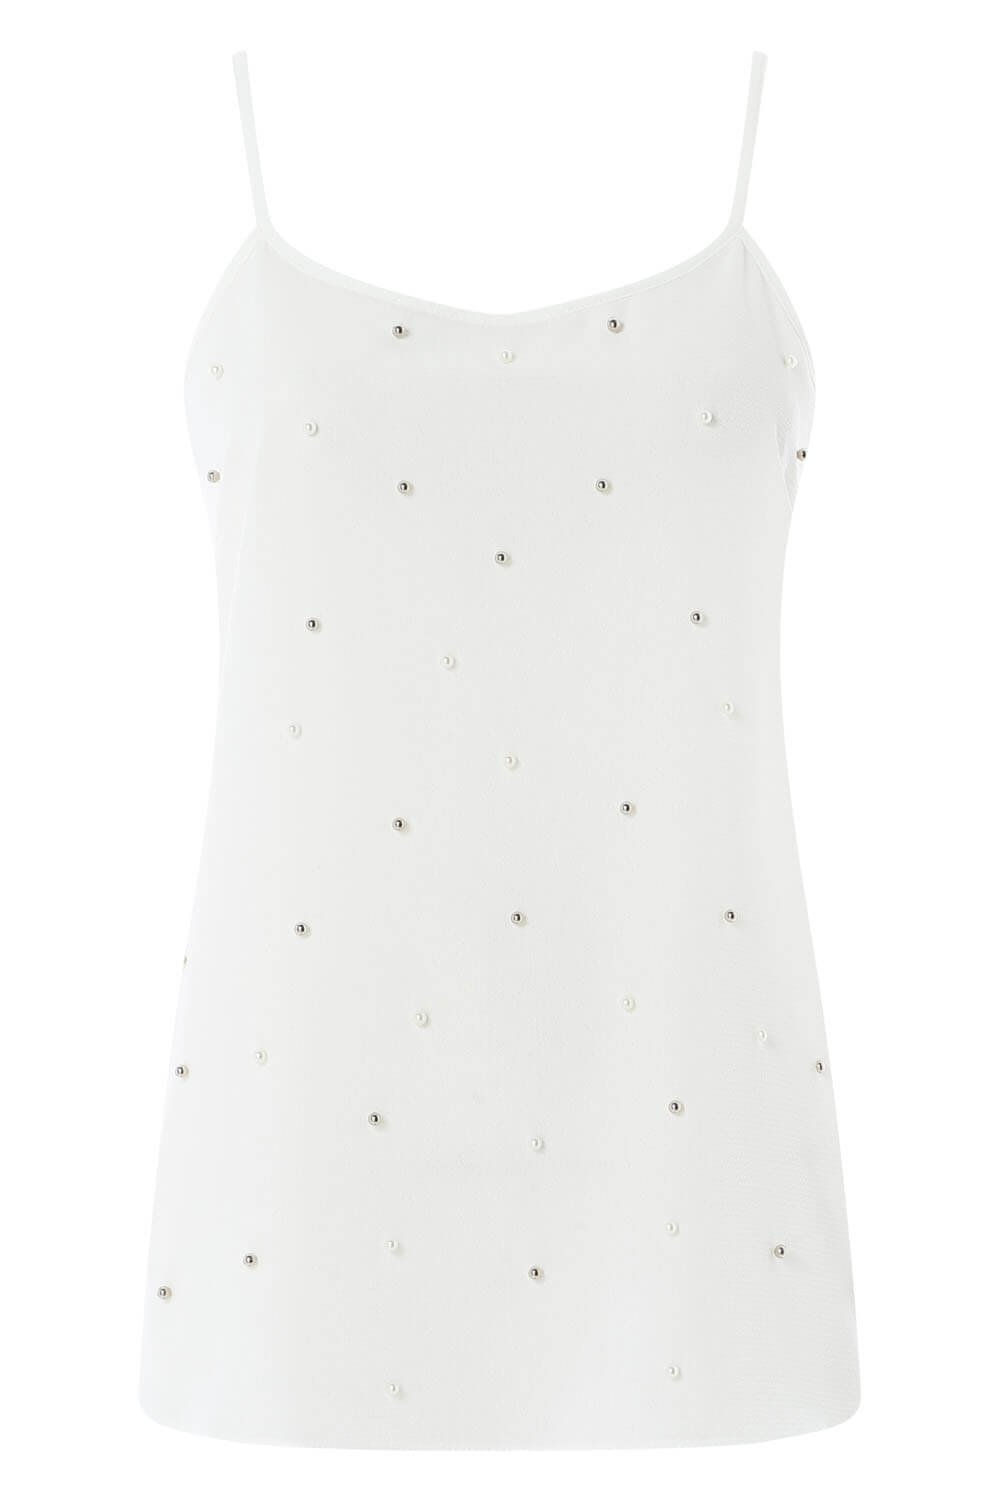 Ivory  Pearl Embellished Camisole Top, Image 4 of 8